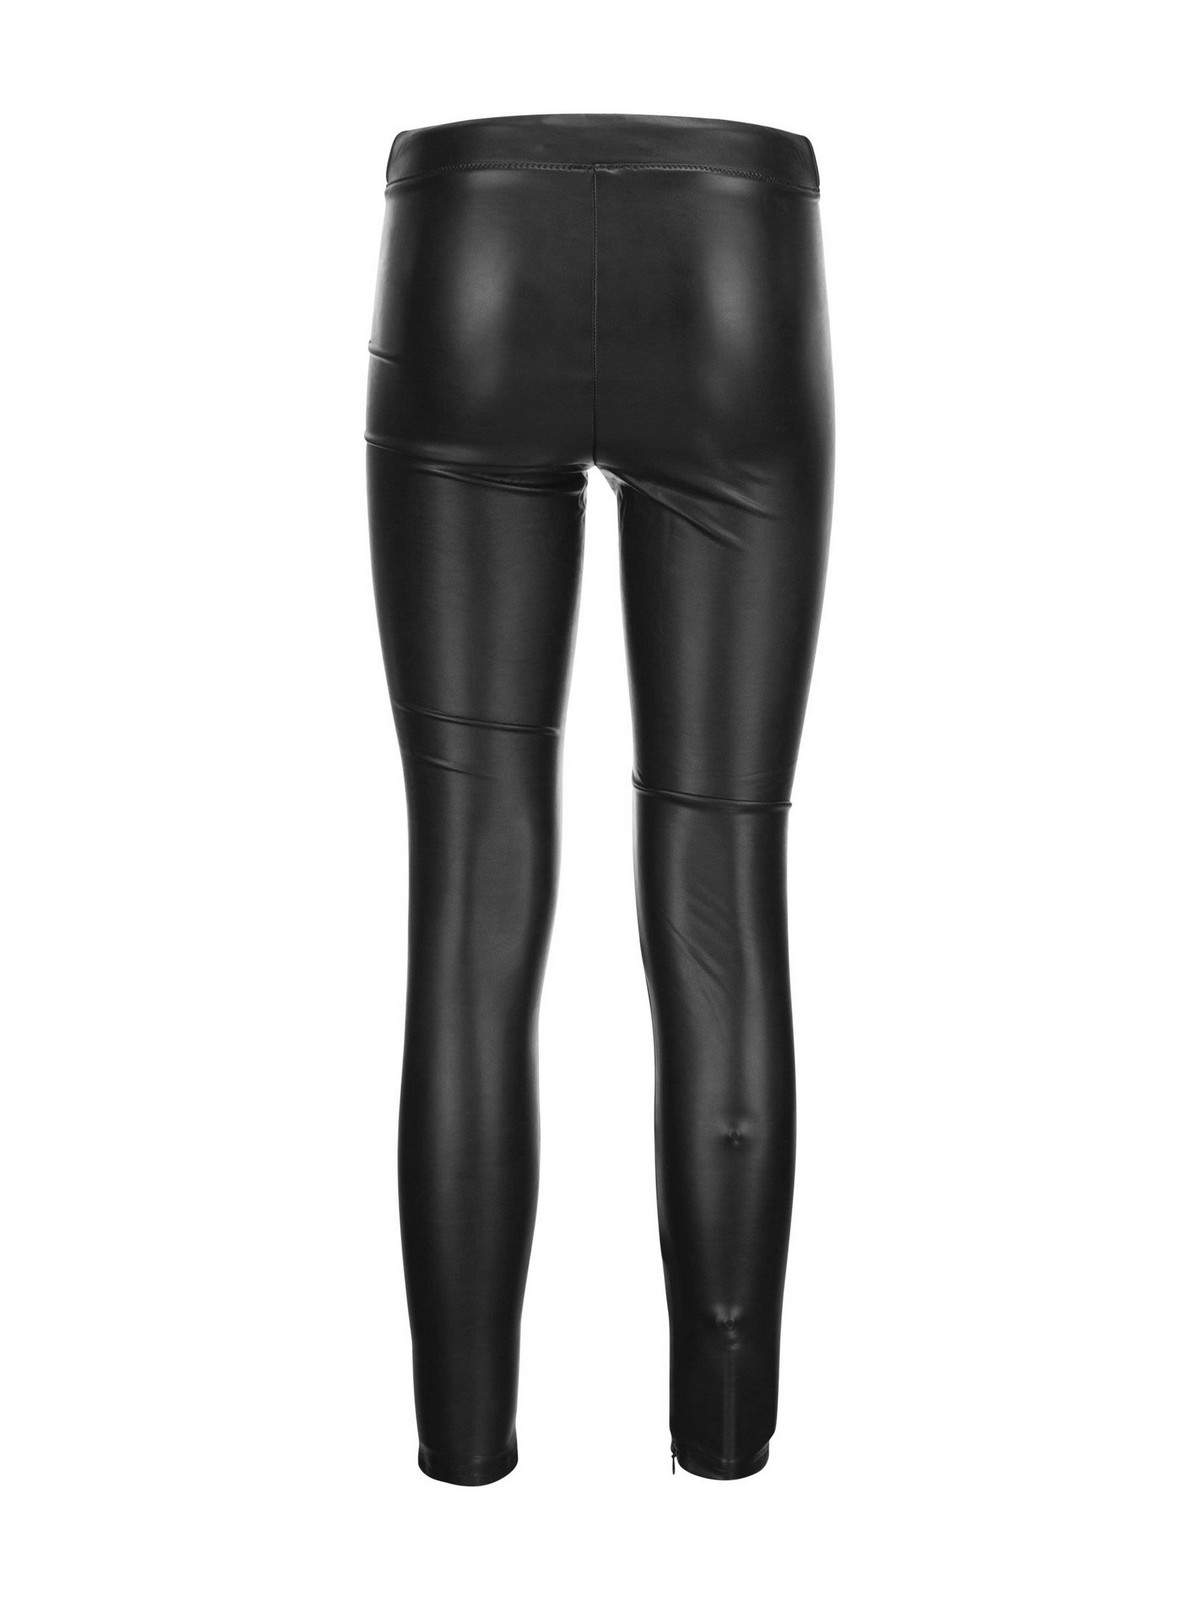 Buy Women Black Leather Pants/ High Waisted Leather Leggings for Women/  Black Leggings for Women Online in India - Etsy